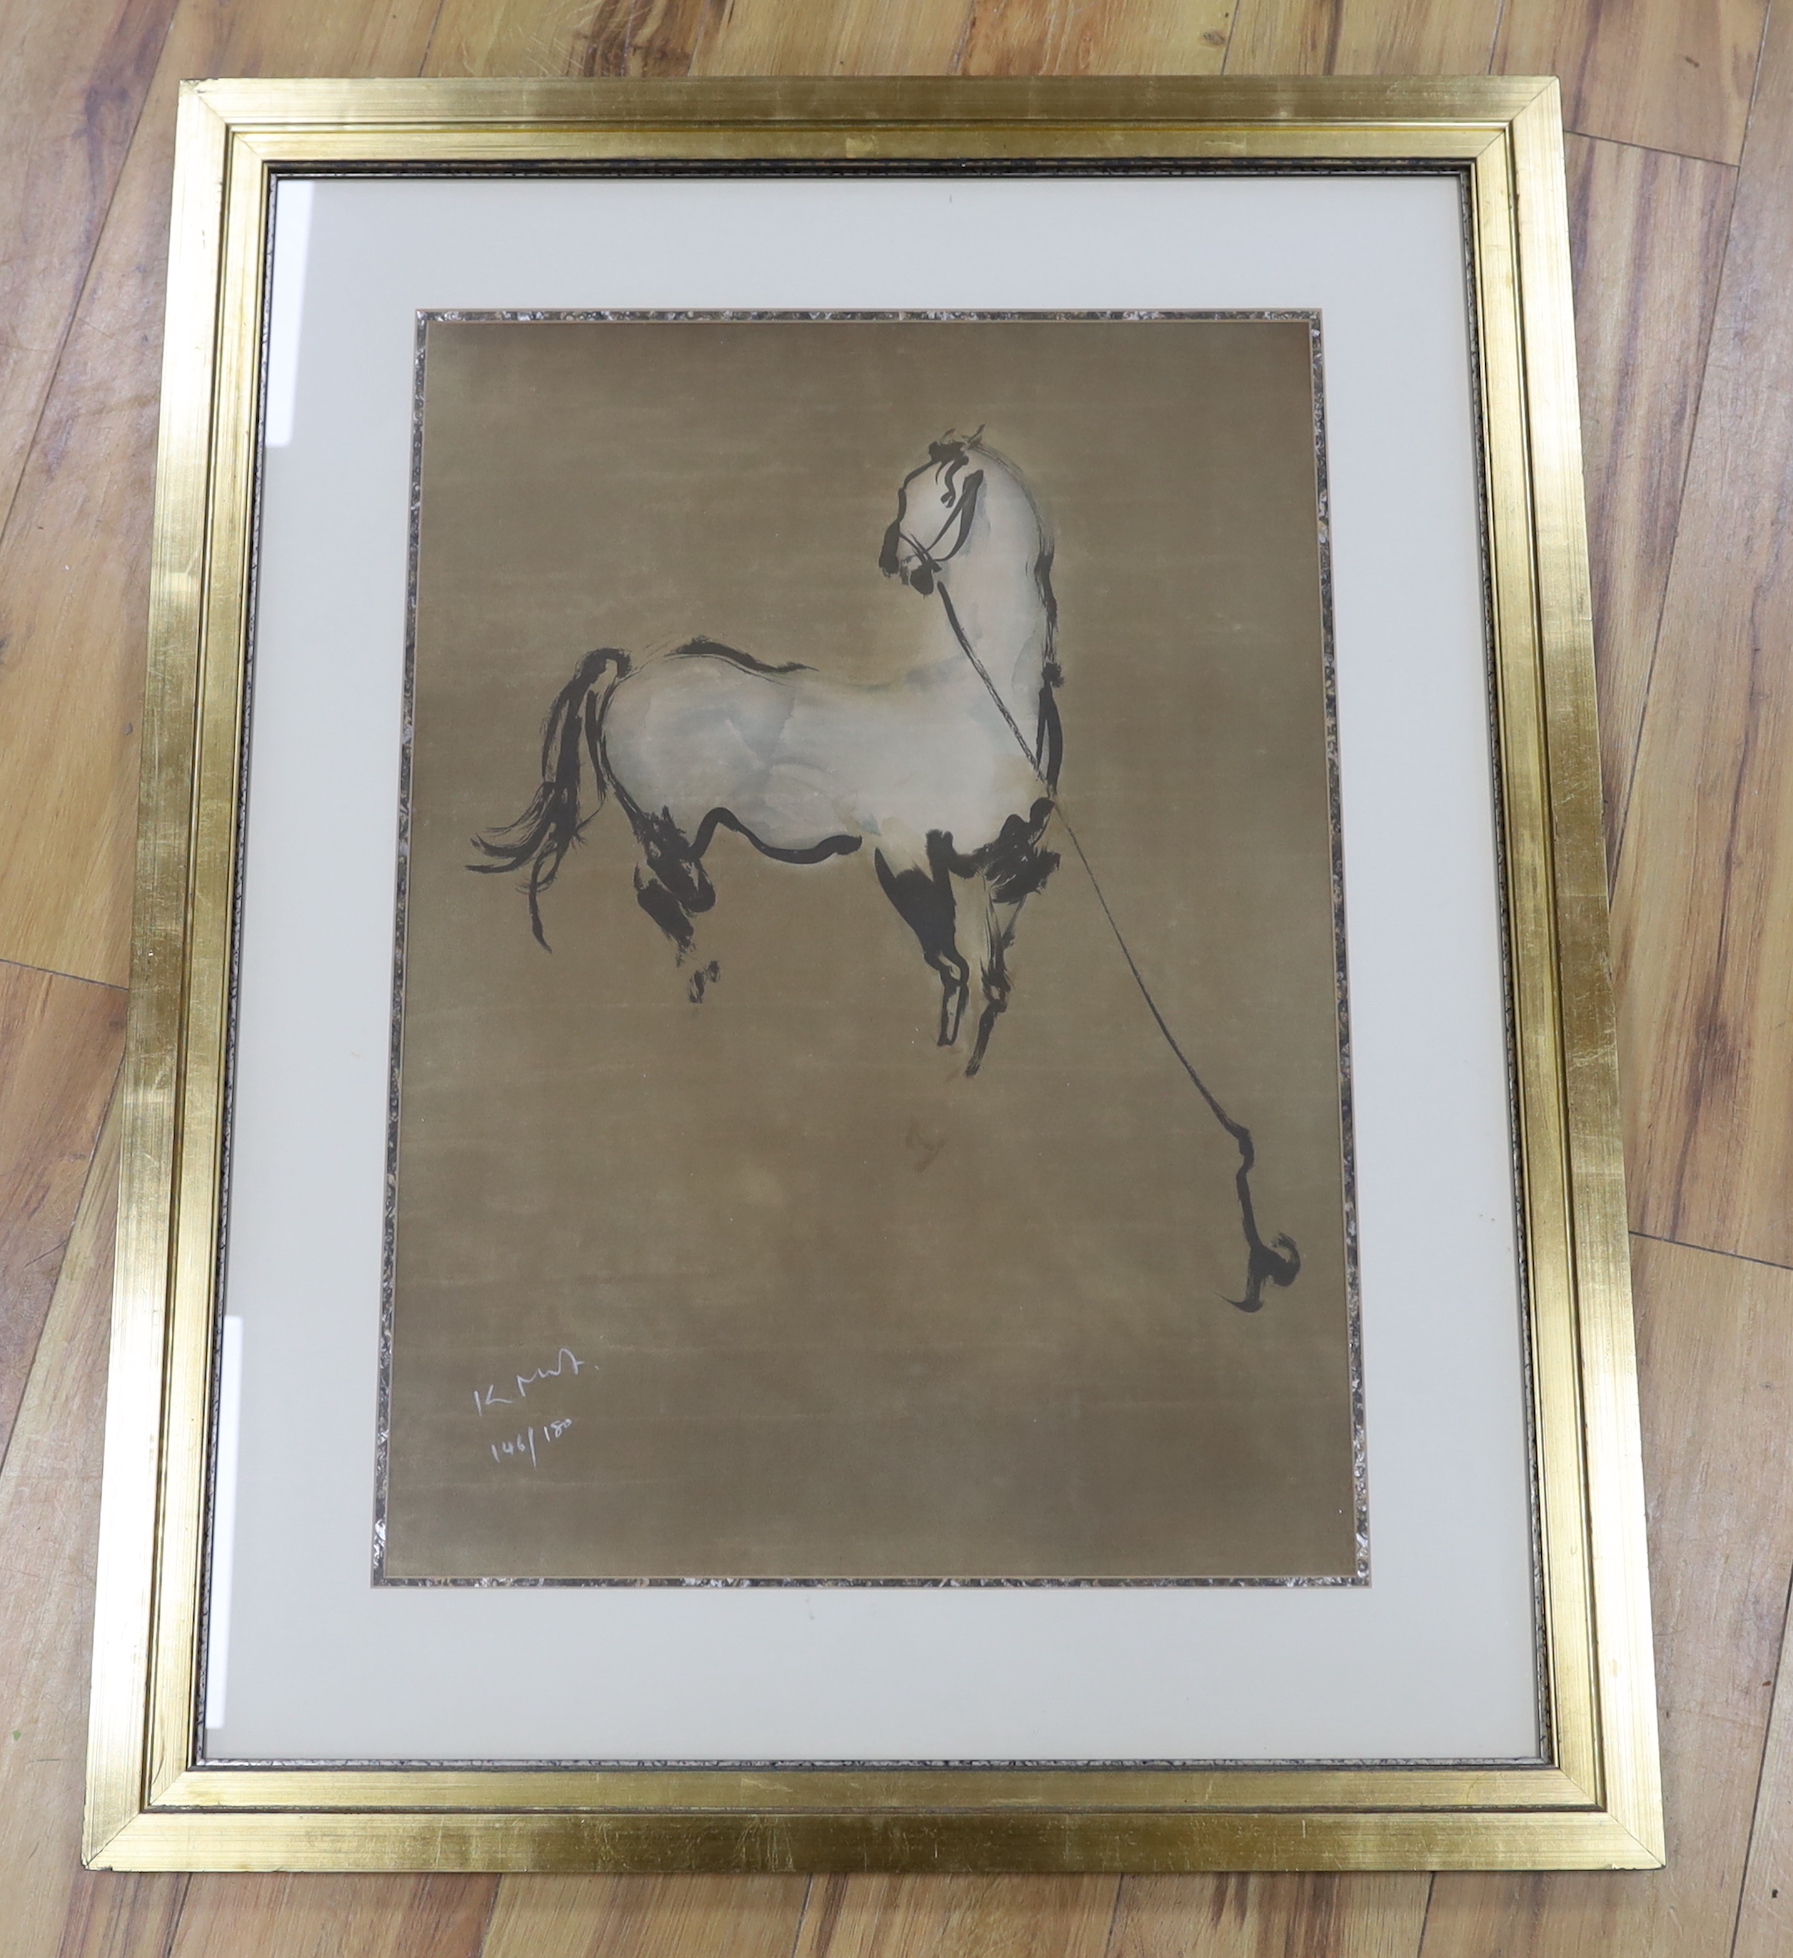 Kaiko Moti (Indian, 1921-1989), limited edition print, Tethered white horse, signed, 146/180, 73 x 52cm